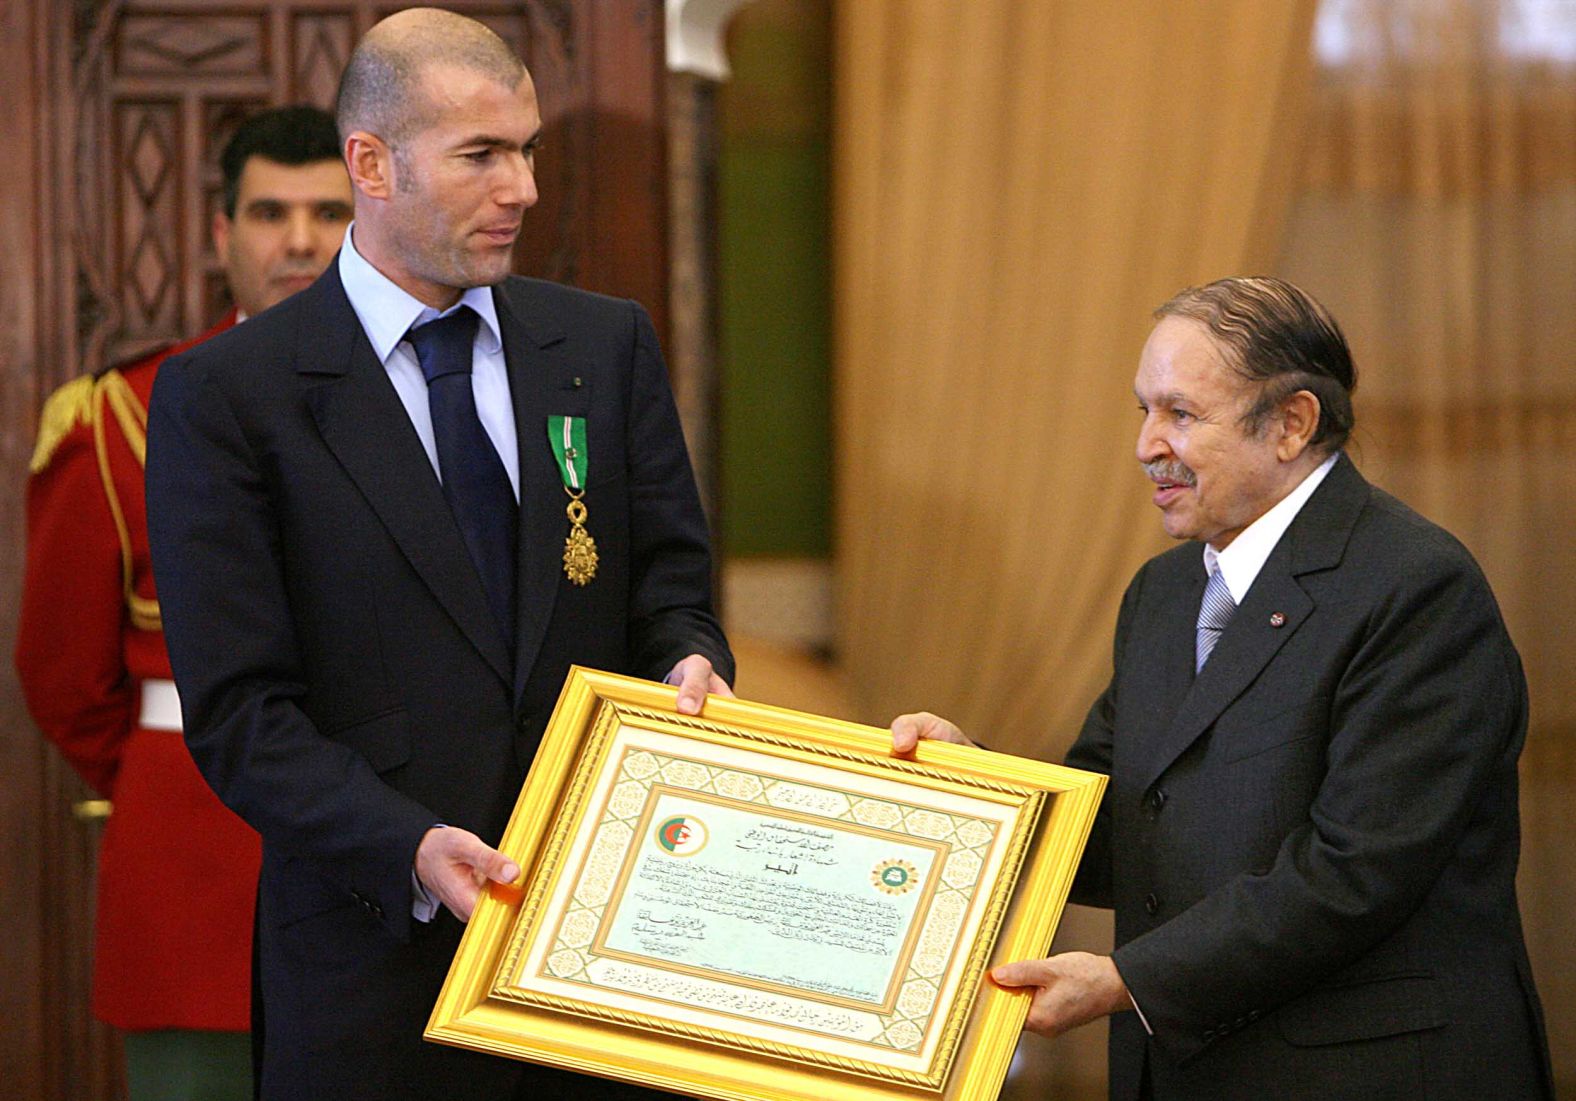 Bouteflika presents French soccer star Zinedine Zidane with Algeria's highest distinction, the Al-Athir medal, during a ceremony in December 2006. Zidane's parents emigrated to France from Algeria.